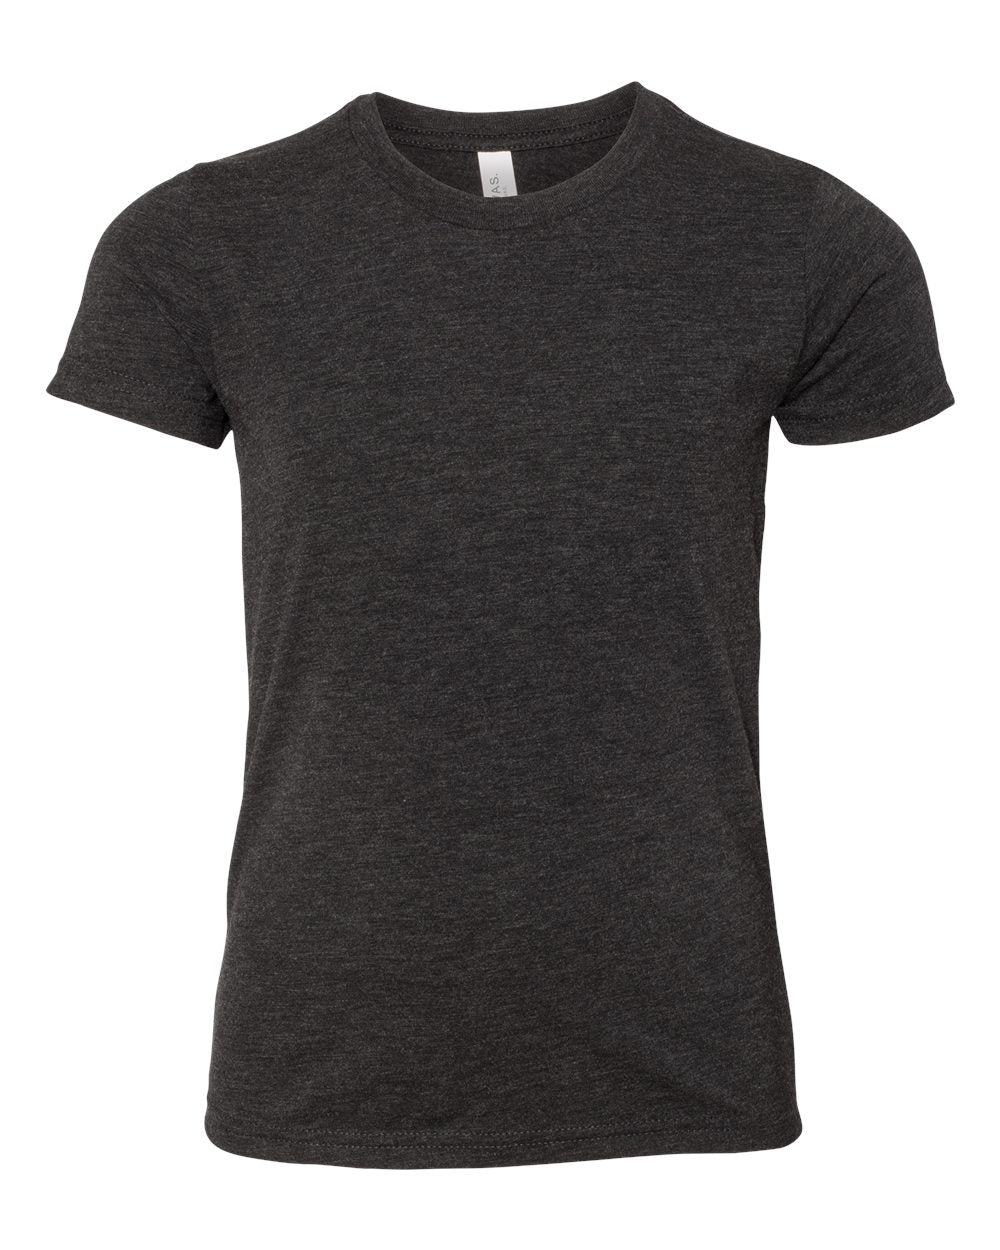 Bella + Canvas Youth Triblend Tee (3413y) in Charcoal Black Triblend